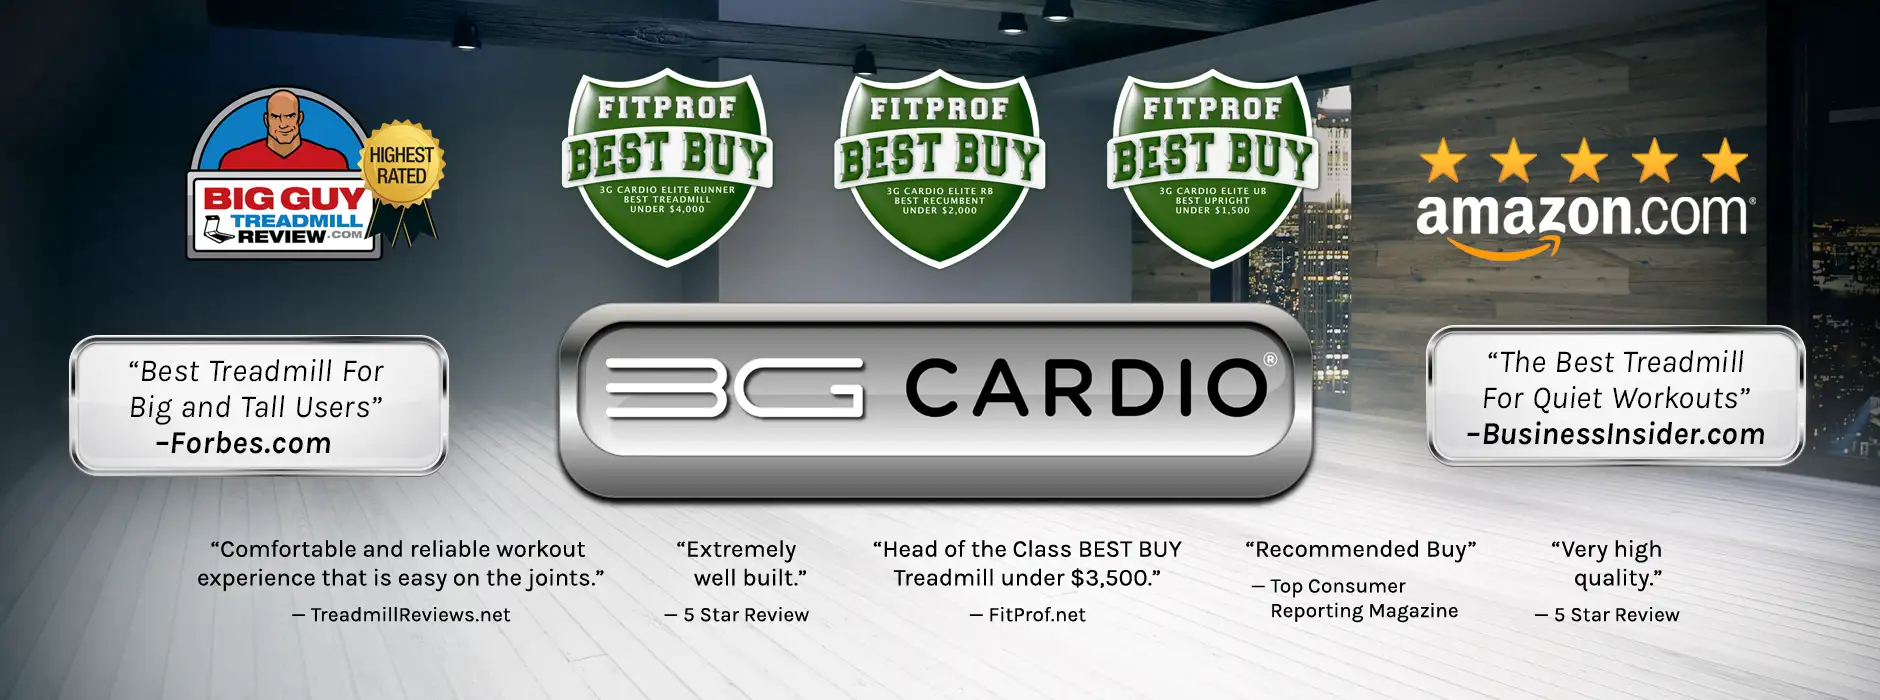 3G Cardio sells award-winning exercise and fitness equipment